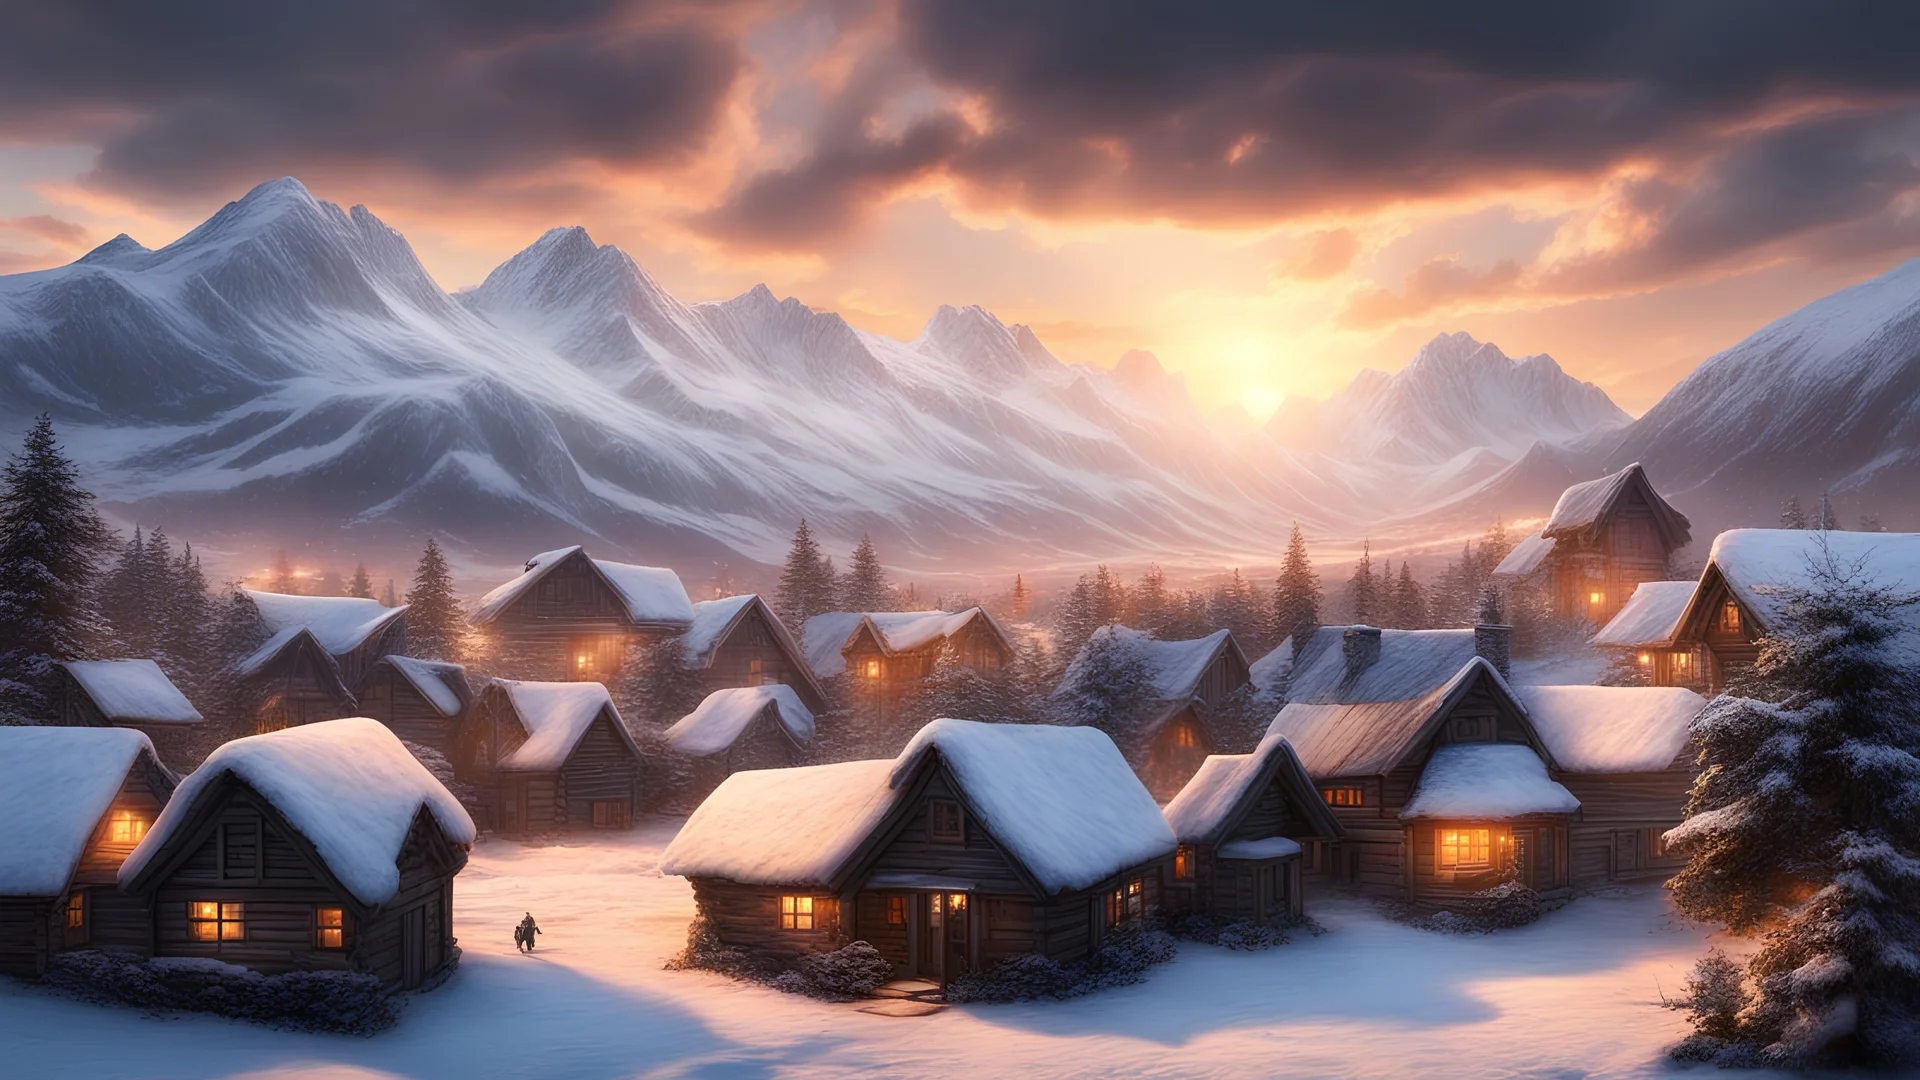 Hyper Realistic village cloudy sunset & snowy mountains